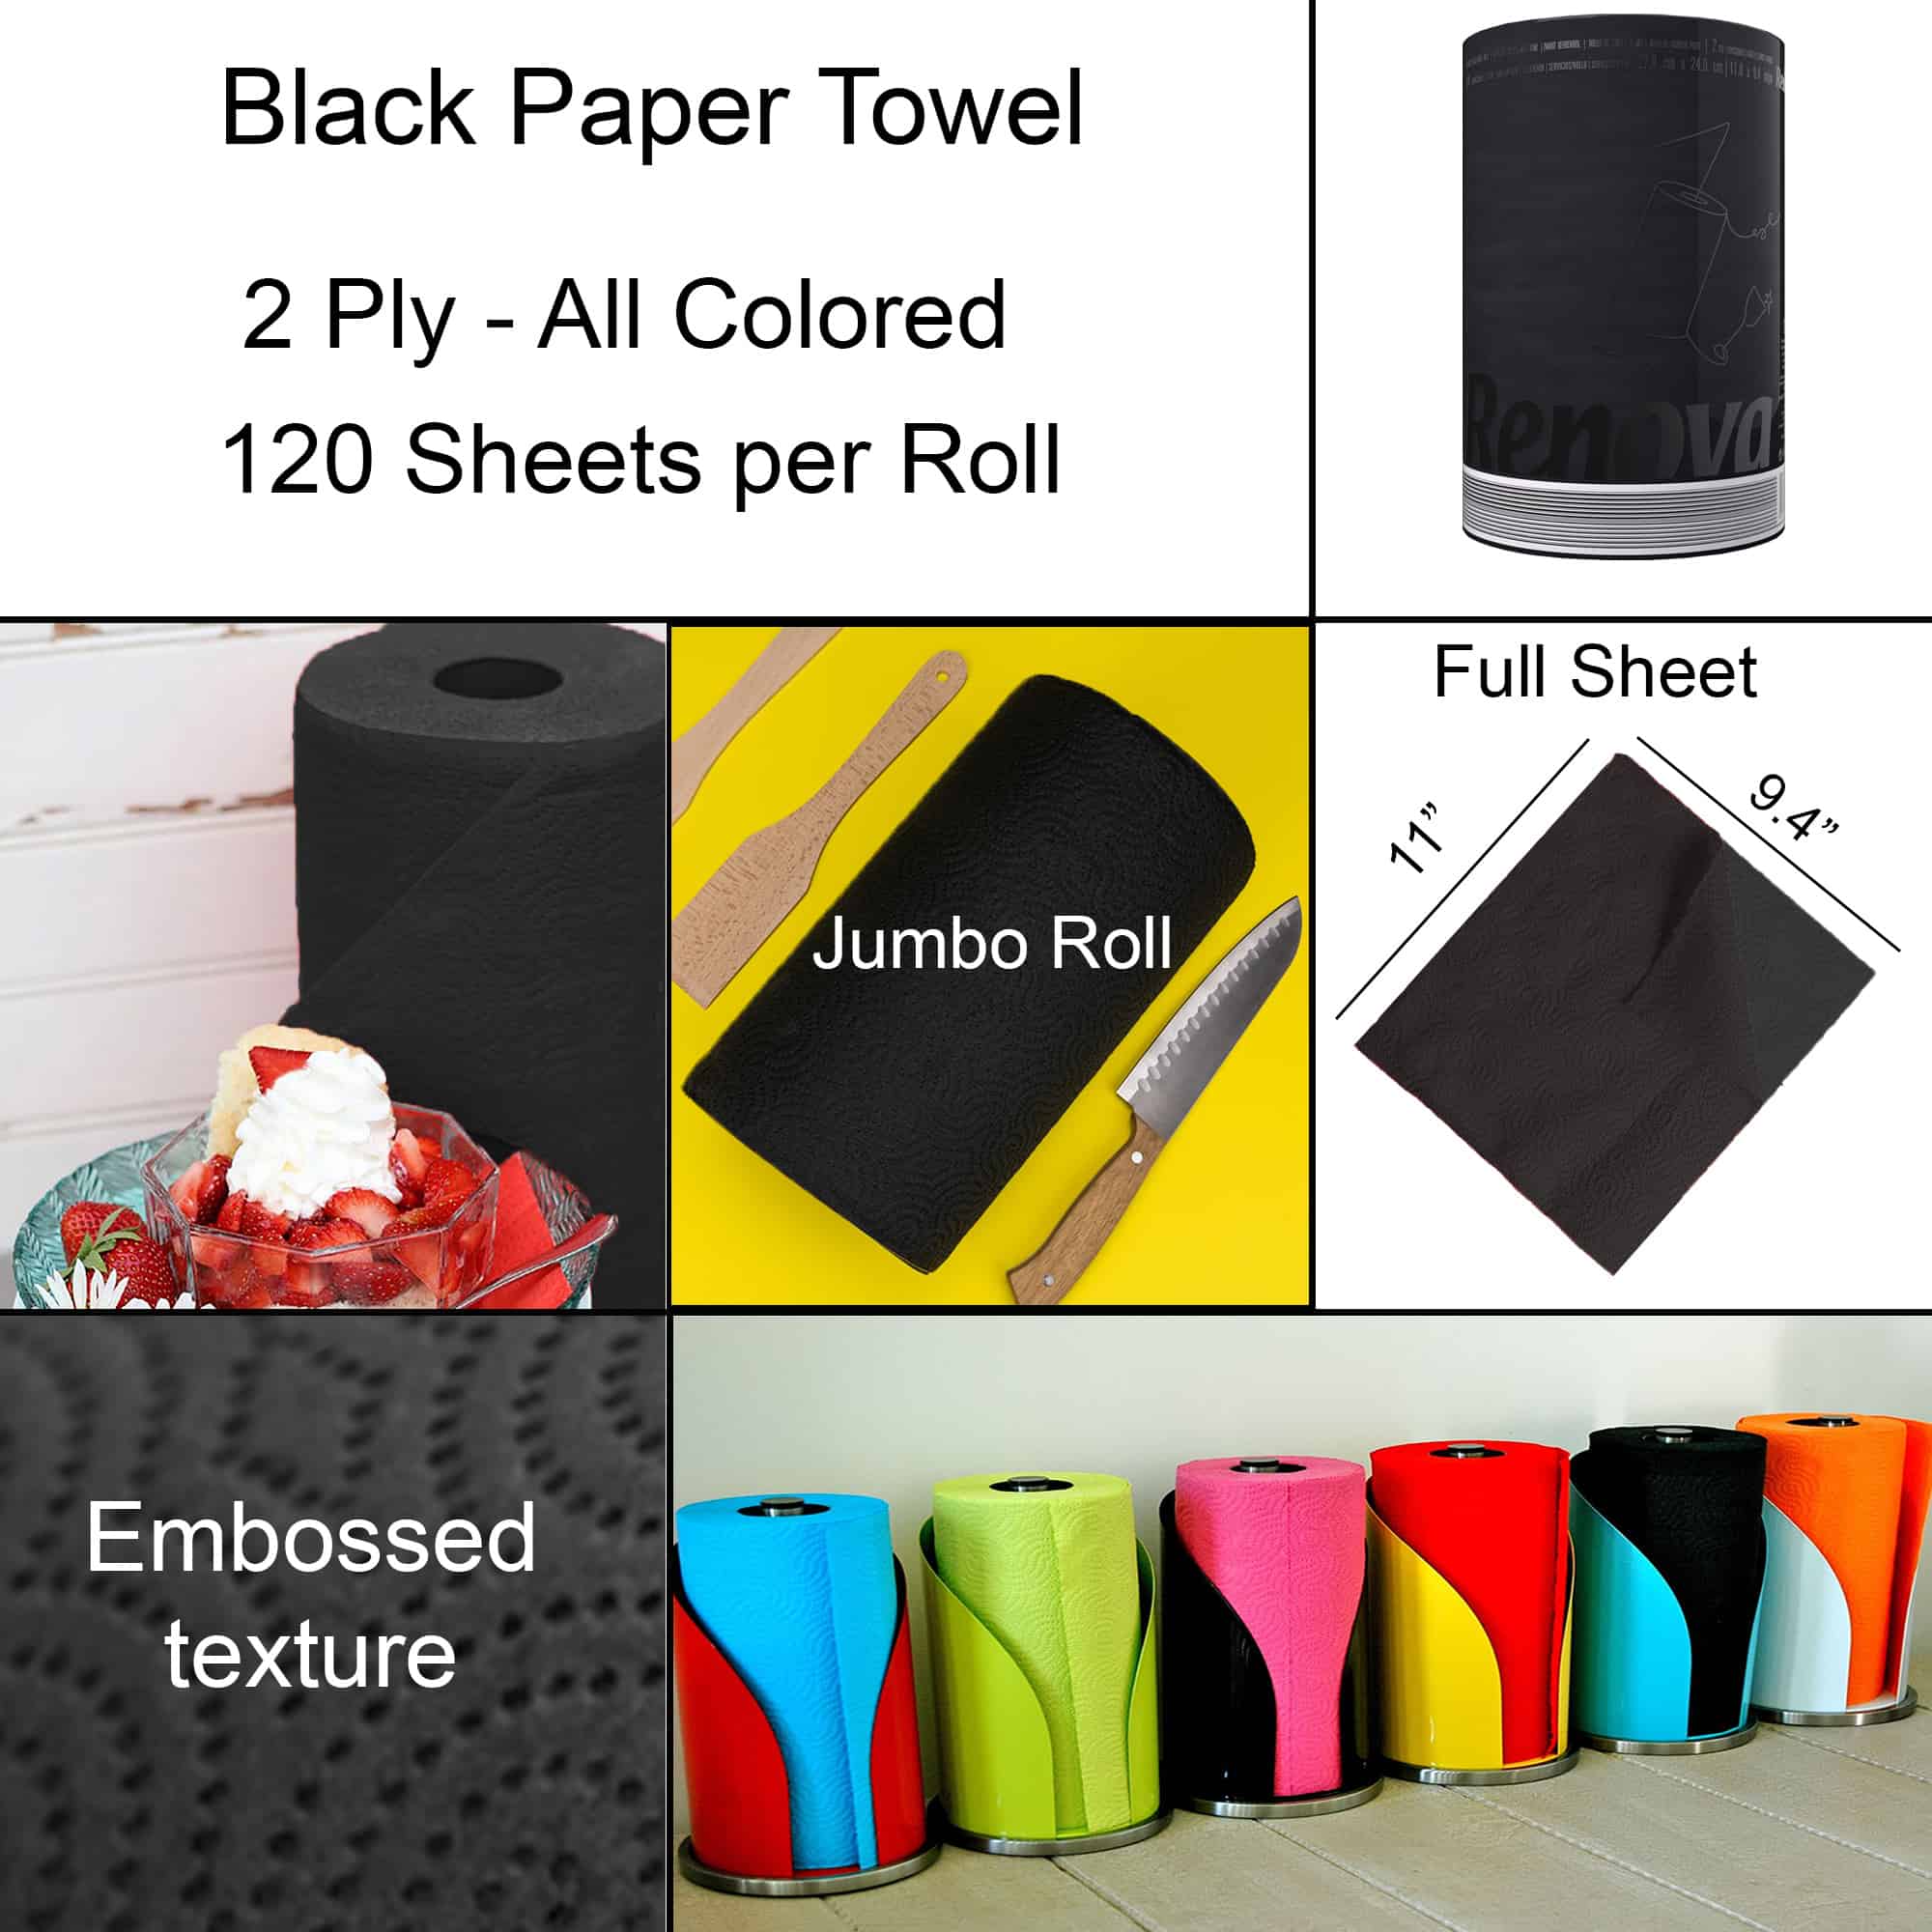 https://roll-lux.com/wp-content/uploads/2020/06/RGB200071800SET6-Black-Paper-Towel-Jumbo-Roll-2-Ply-120-Highly-Absorbent-Sheets-Set-of-6-4-1.jpg